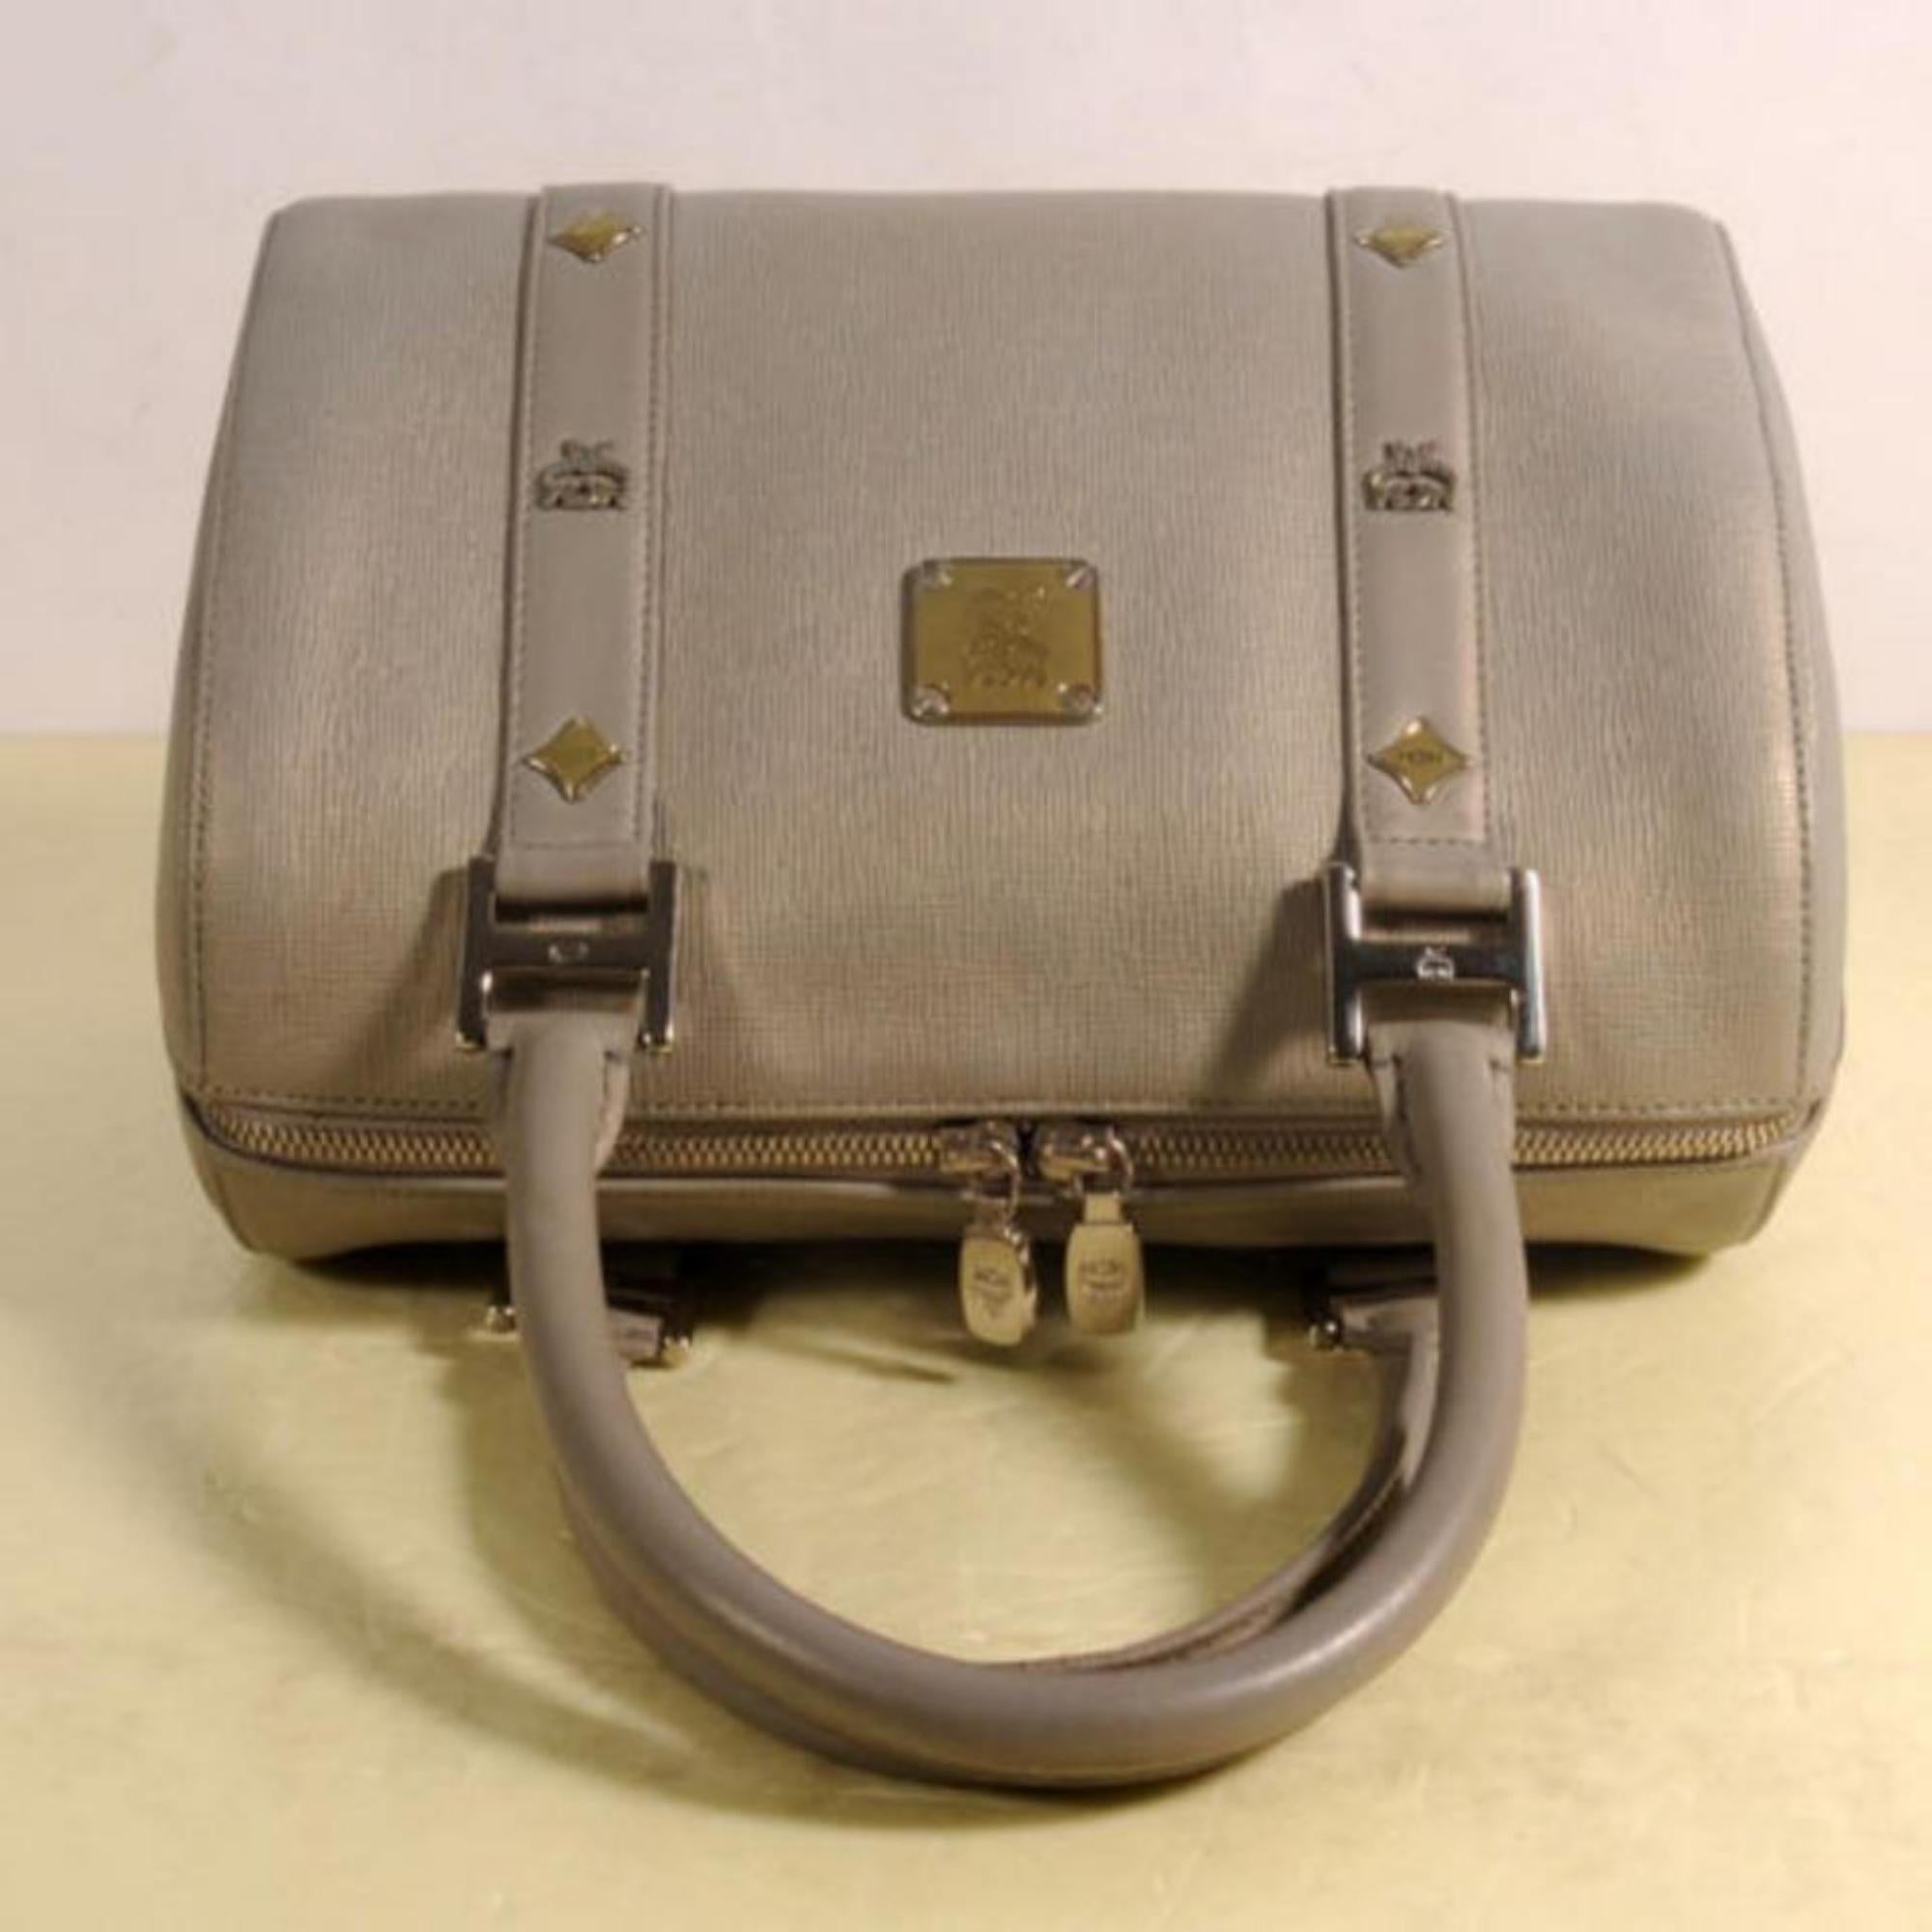 MCM Studded Saffiano Boston 868498 Grey Leather Tote In Good Condition For Sale In Forest Hills, NY